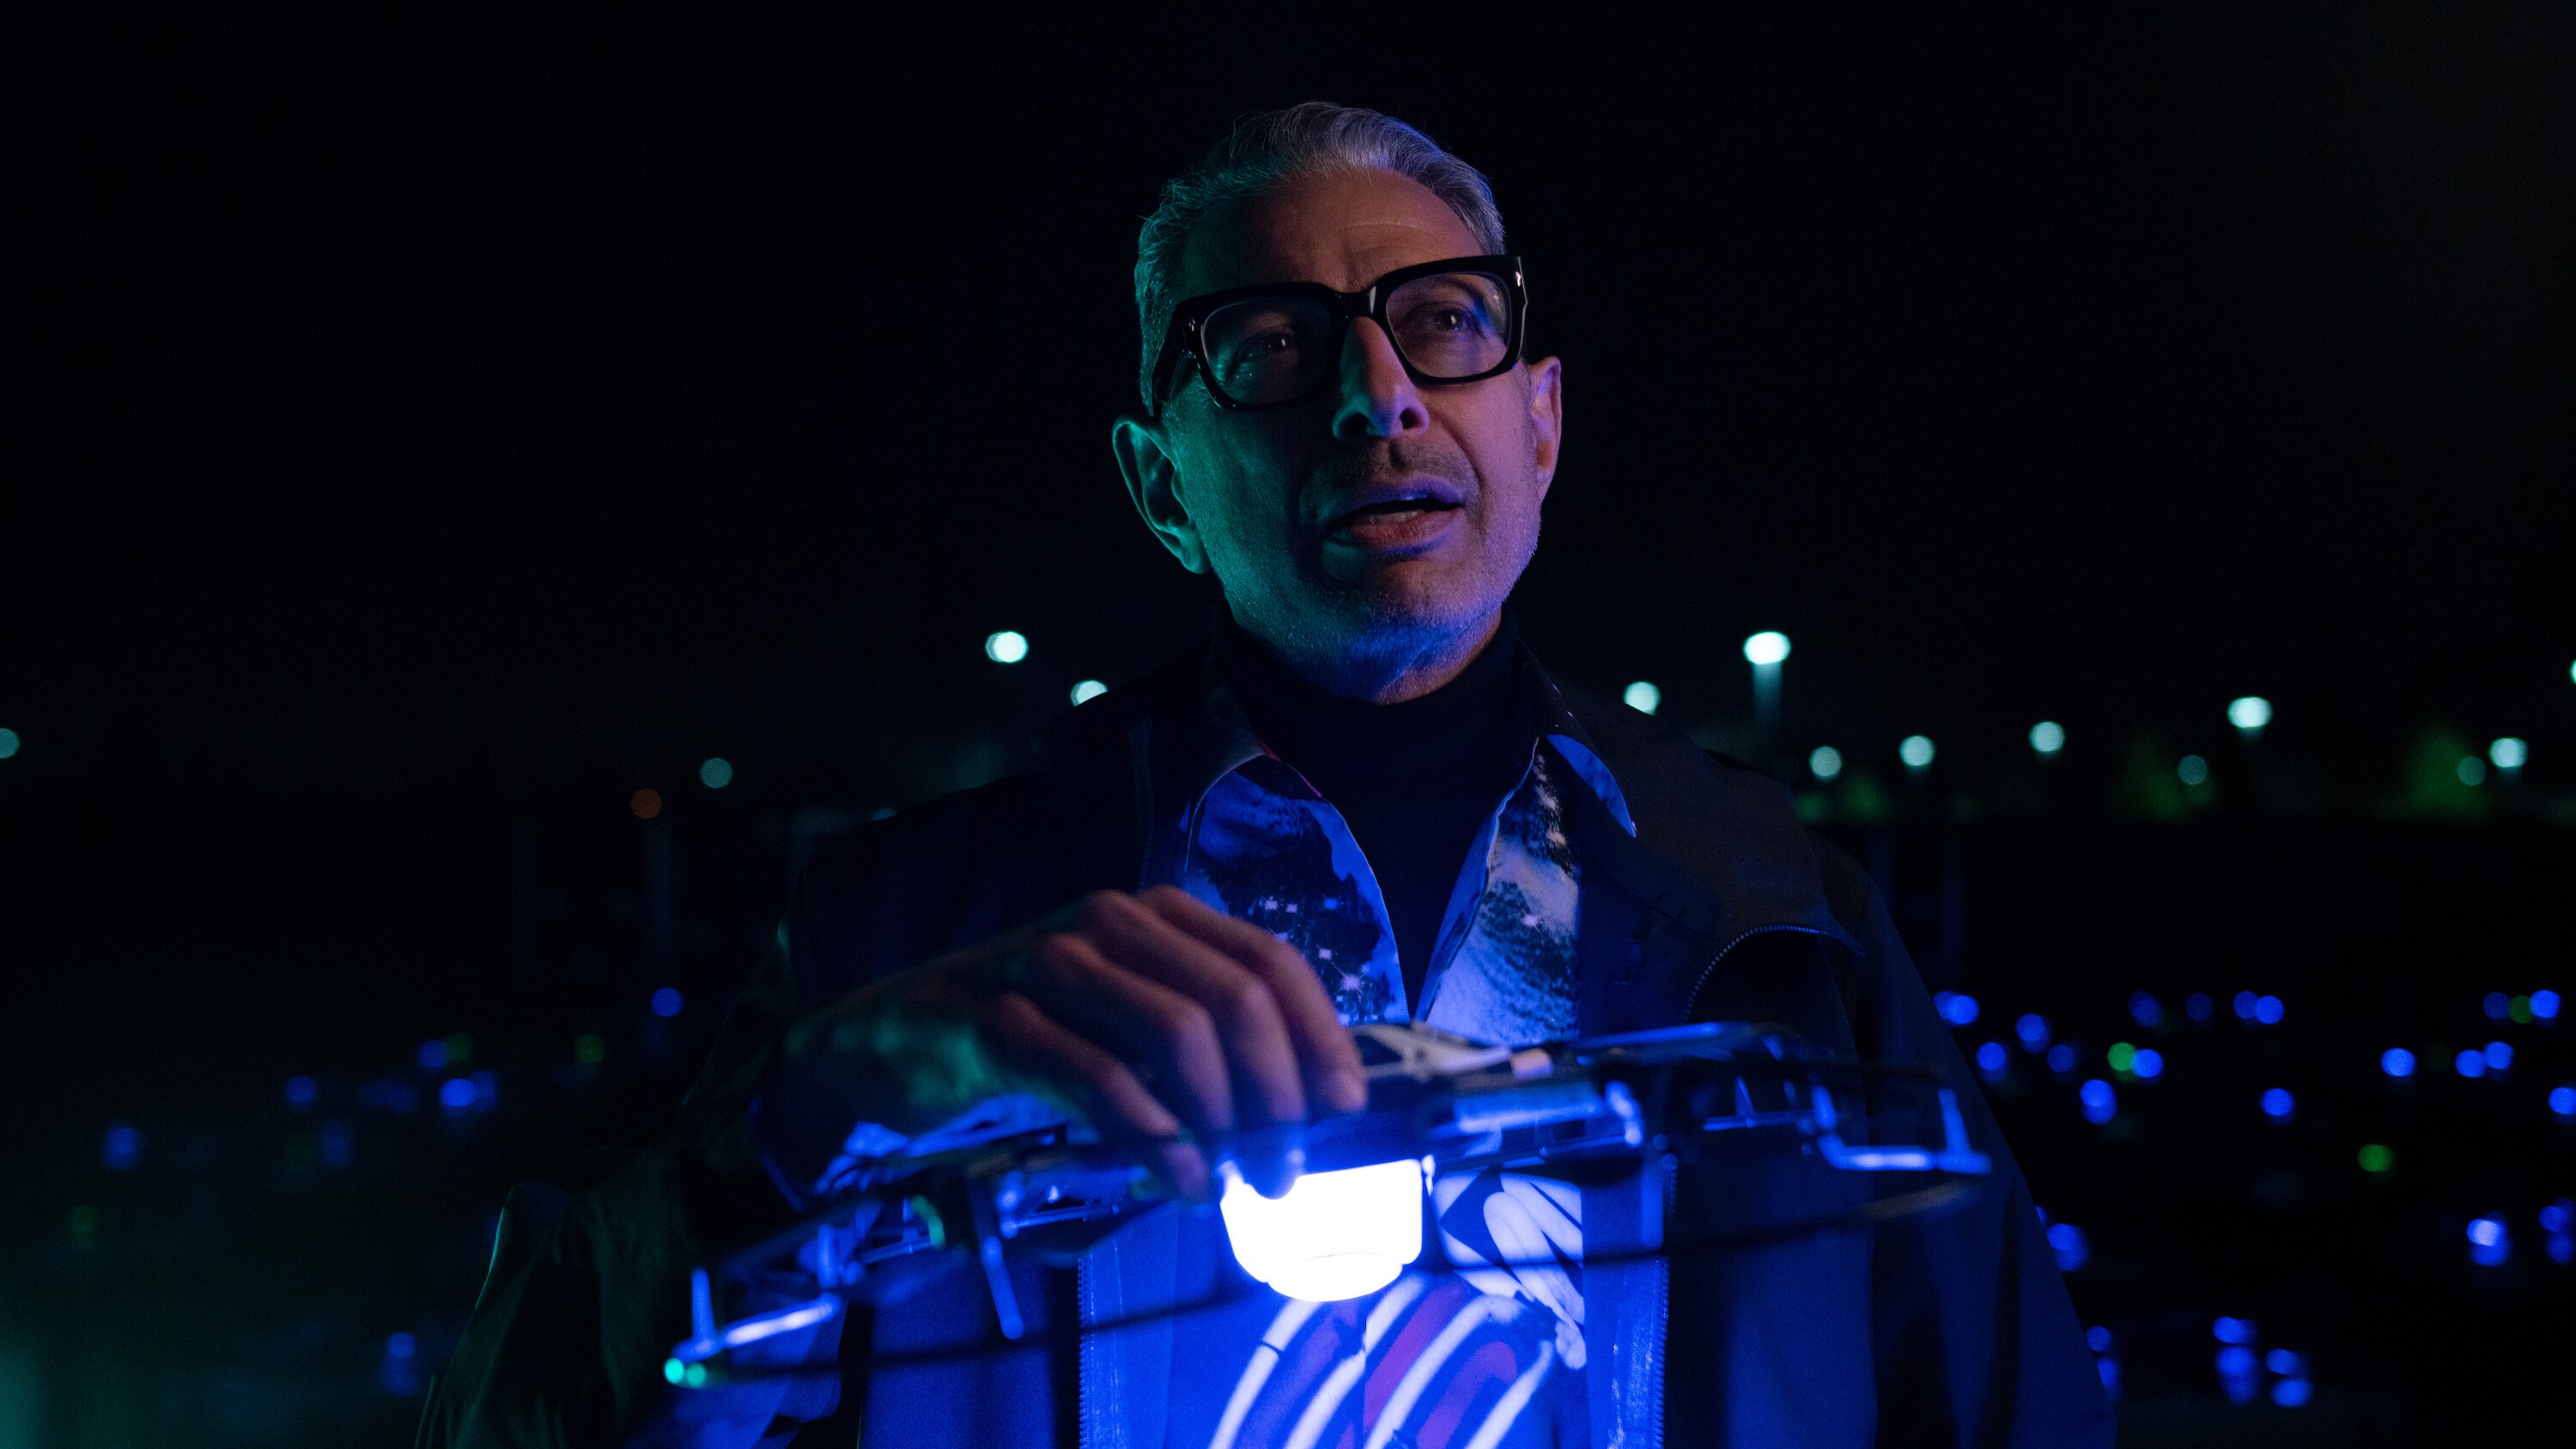 Folsom, CA - Jeff Goldblum holds an Intel drone that is used for light displays as an alternative to fireworks. (Credit: National Geographic/Justin Koenen)